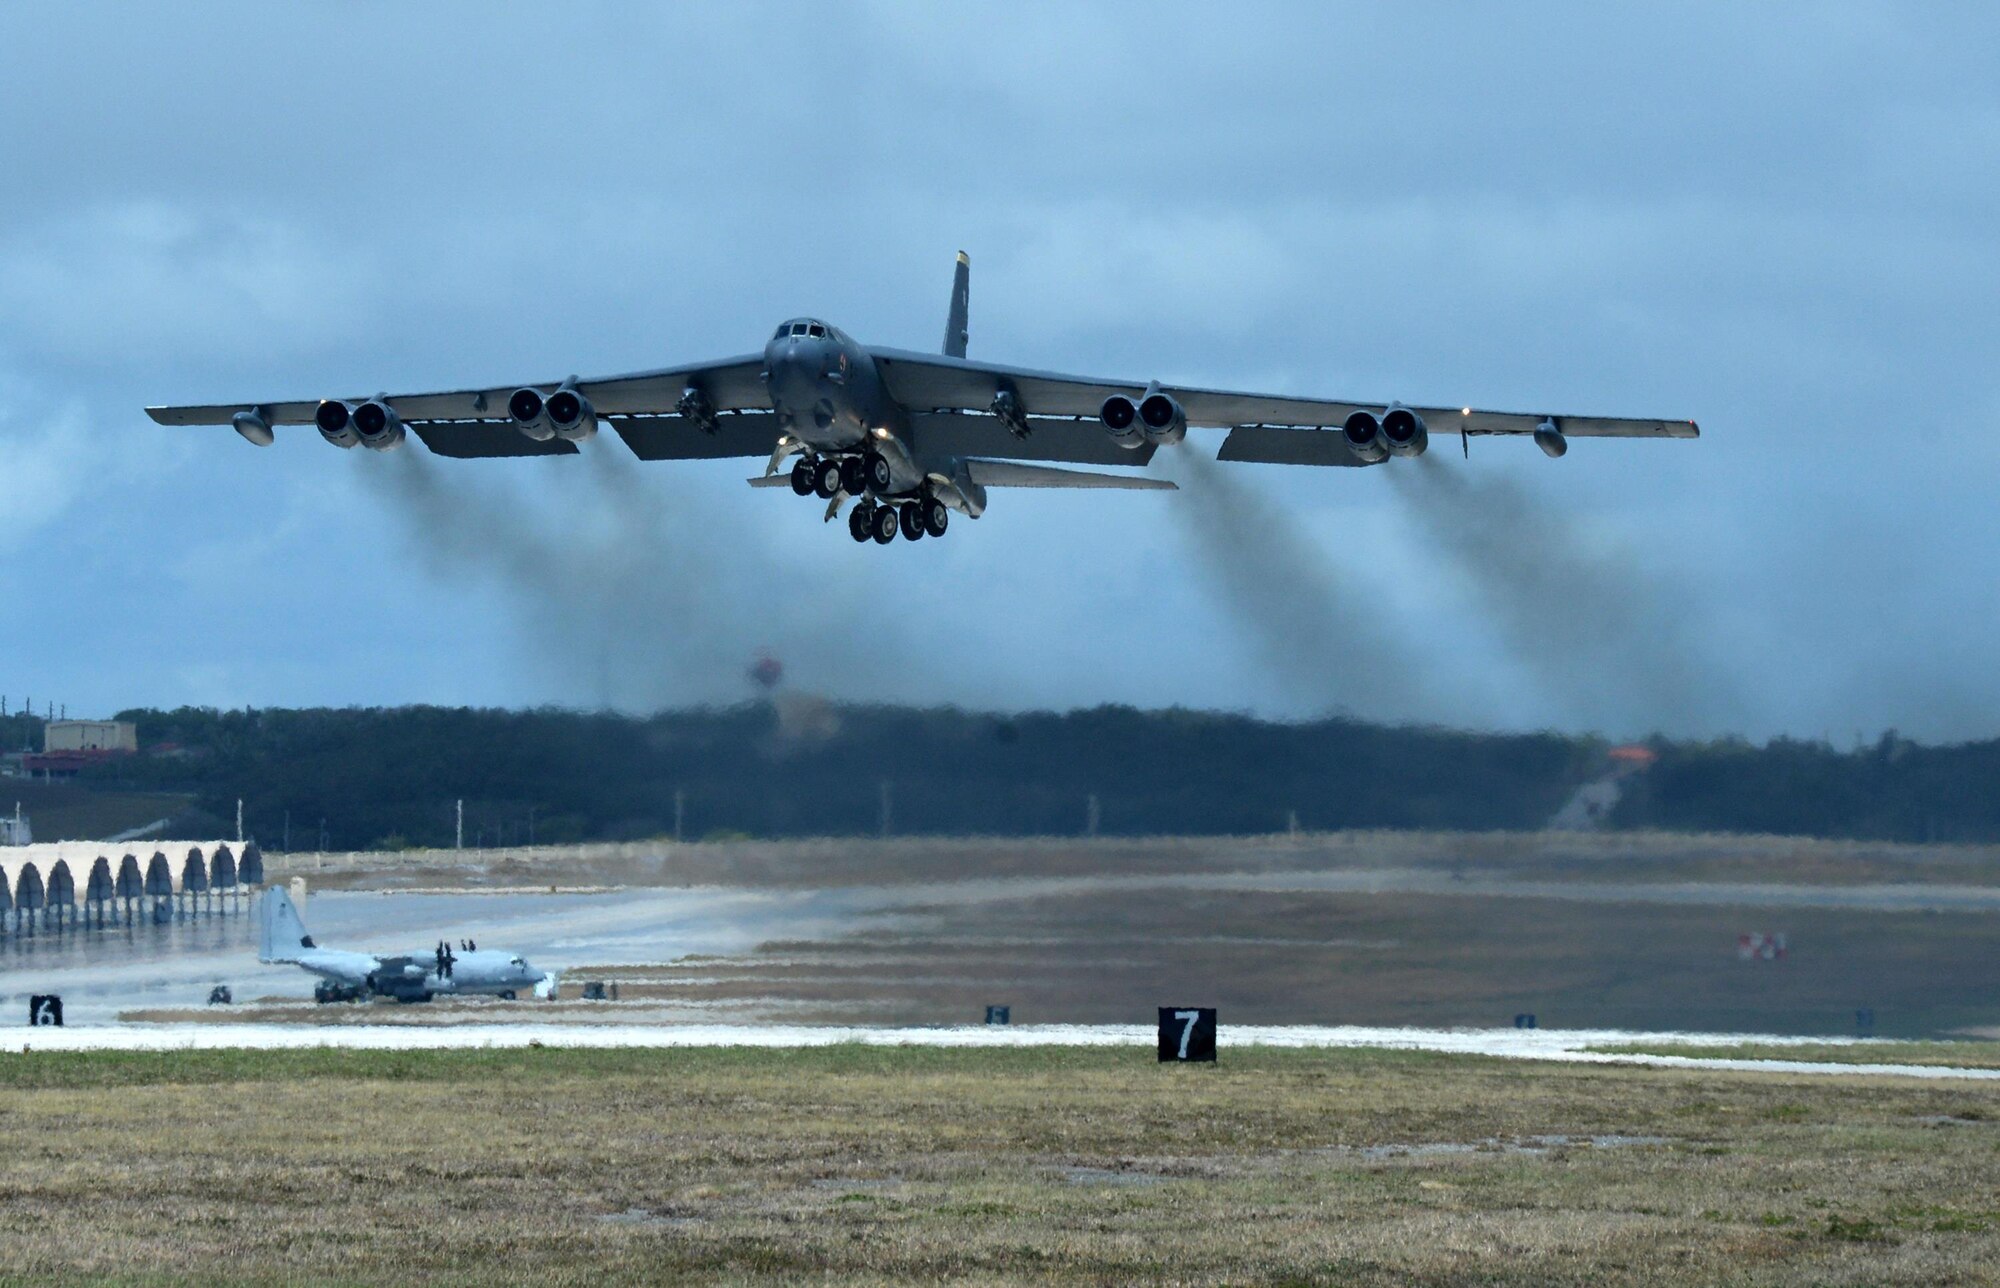 A U.S Air Force B-52 Stratofortress bomber from Minot Air Force Base, North Dakota, takes flight June 16, 2016, at Andersen Air Force Base, Guam. The aircraft is deployed in support of U.S. Pacific Command’s Continuous Bomber Presence operations. This forward deployed presence demonstrates continuing U.S. commitment to stability and security in the Indo-Asia-Pacific region. (U.S. Air Force photo by Airman 1st Class Alexa Ann Henderson/Released)